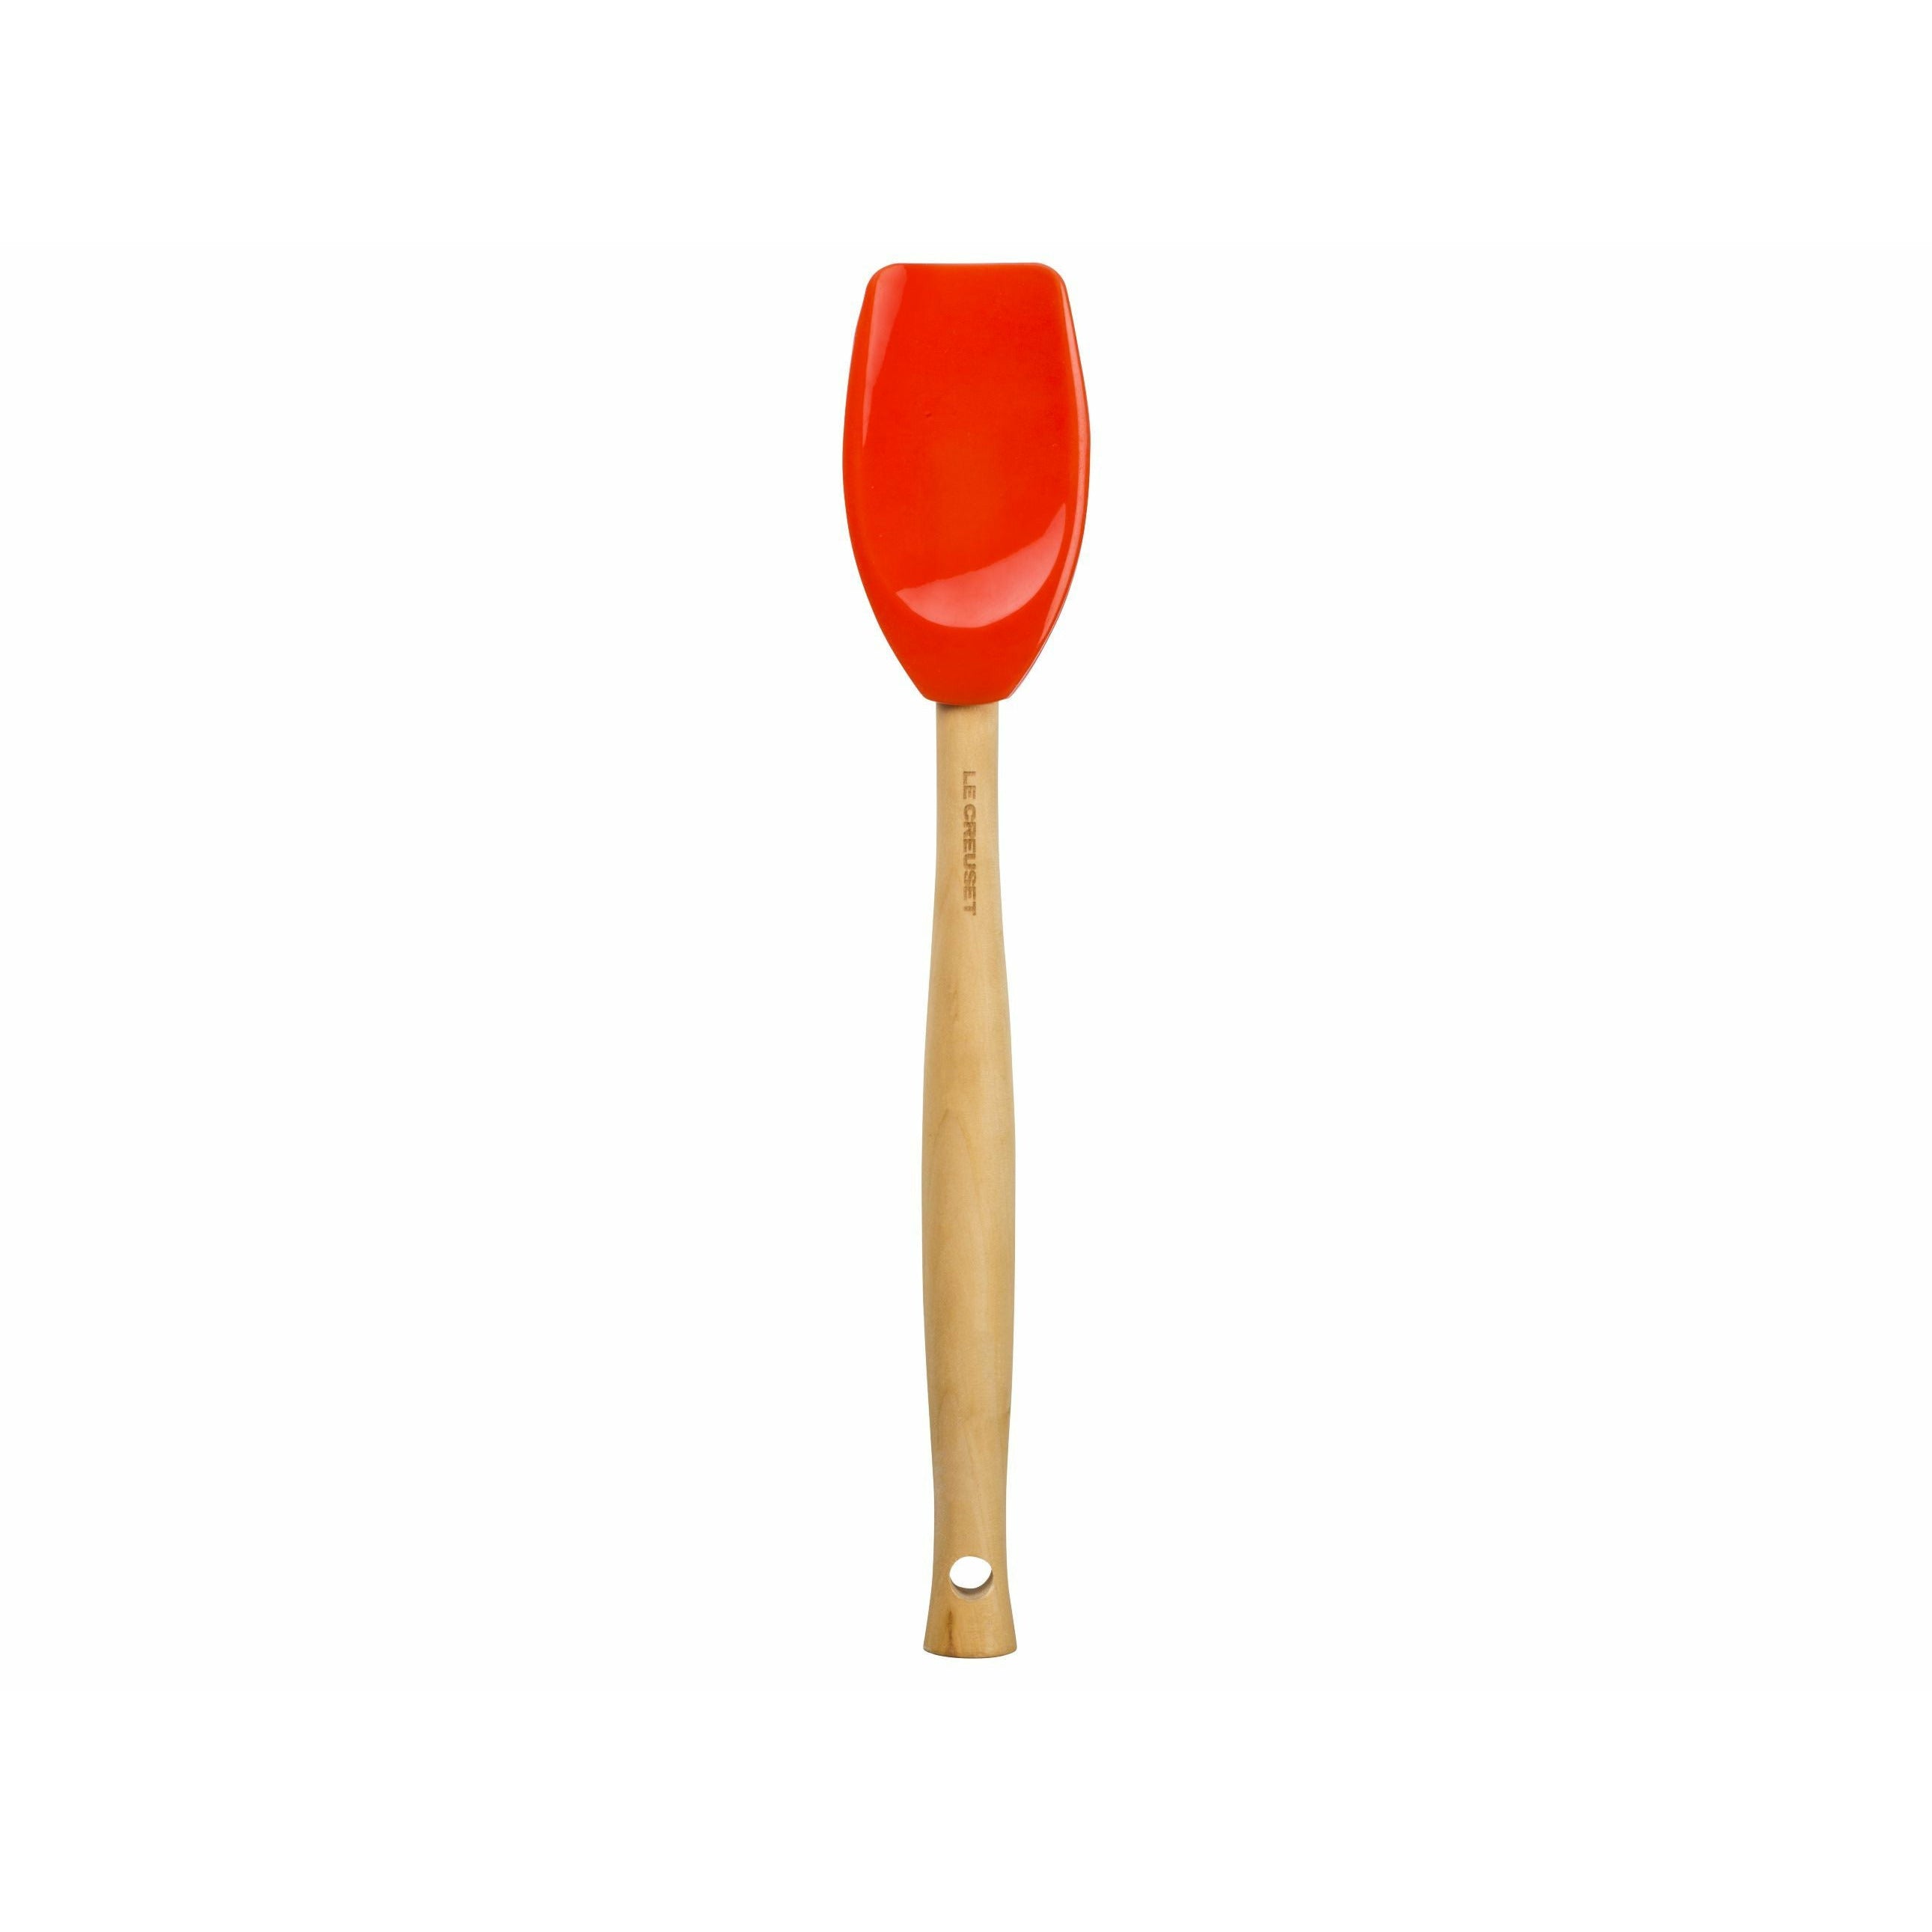 Le Creuset Cooking Spoon Craft, Oven Red